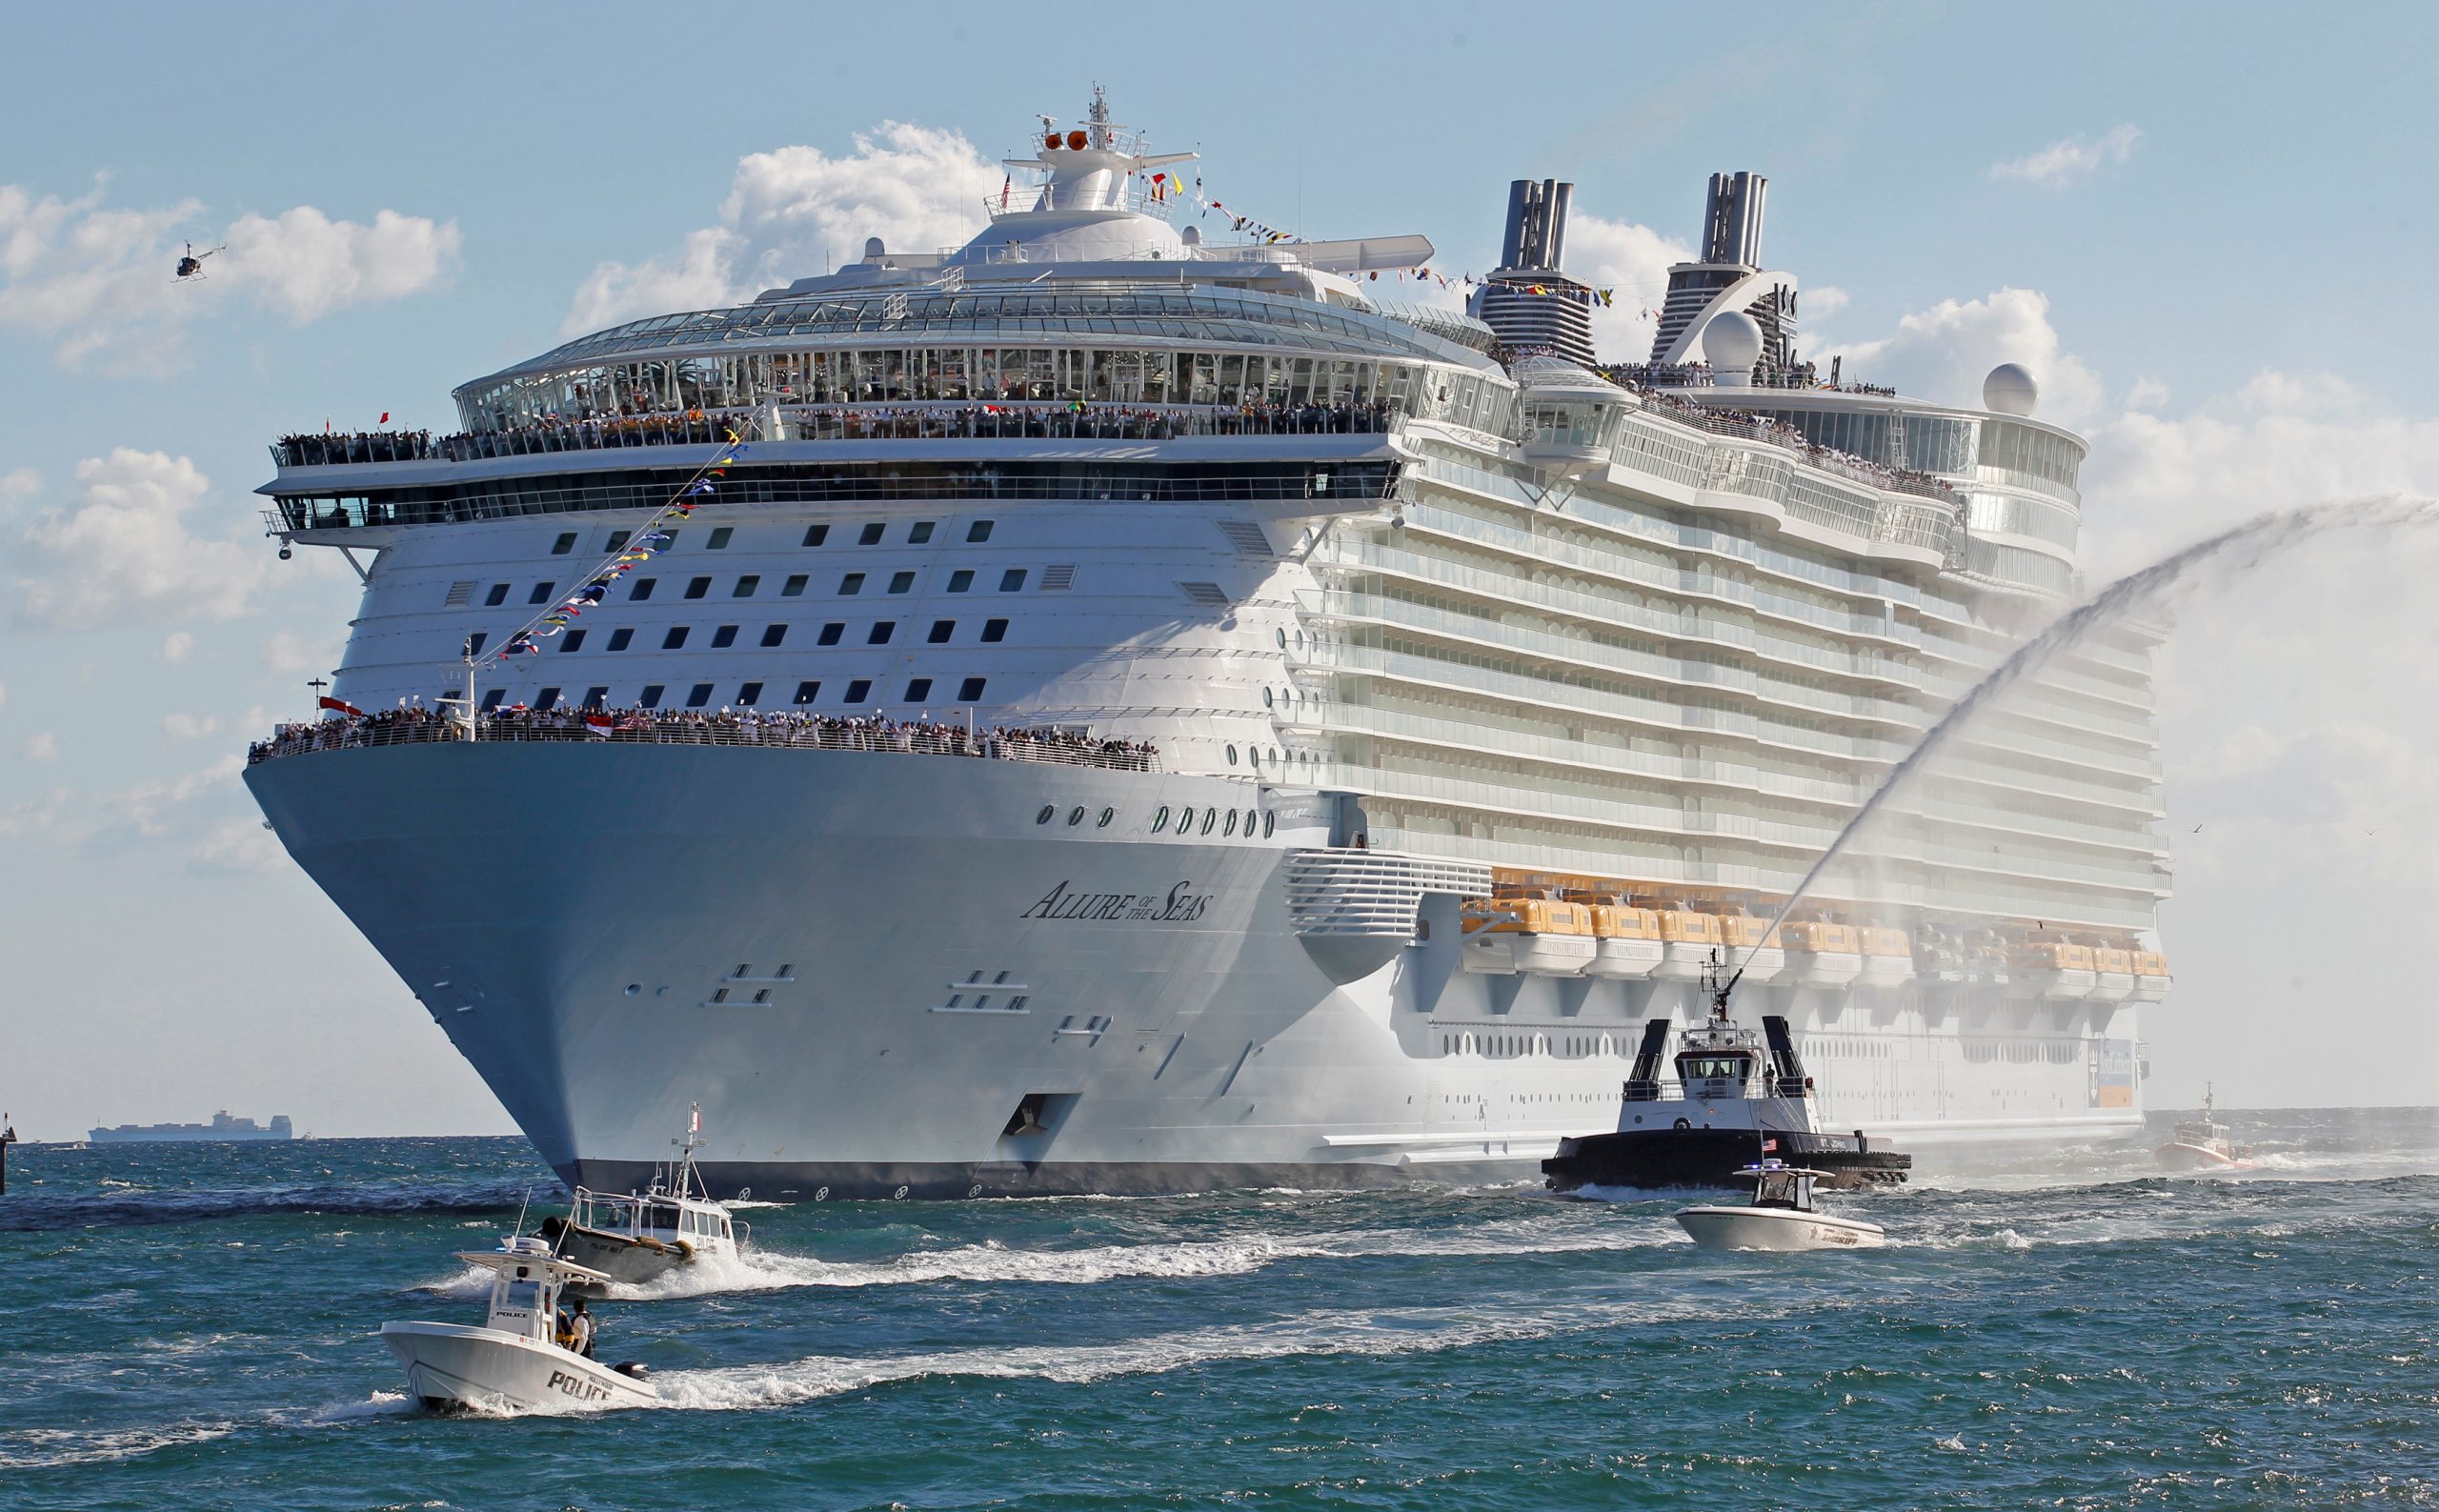 Cruise ship arrivals increased by 25% compared to 2019